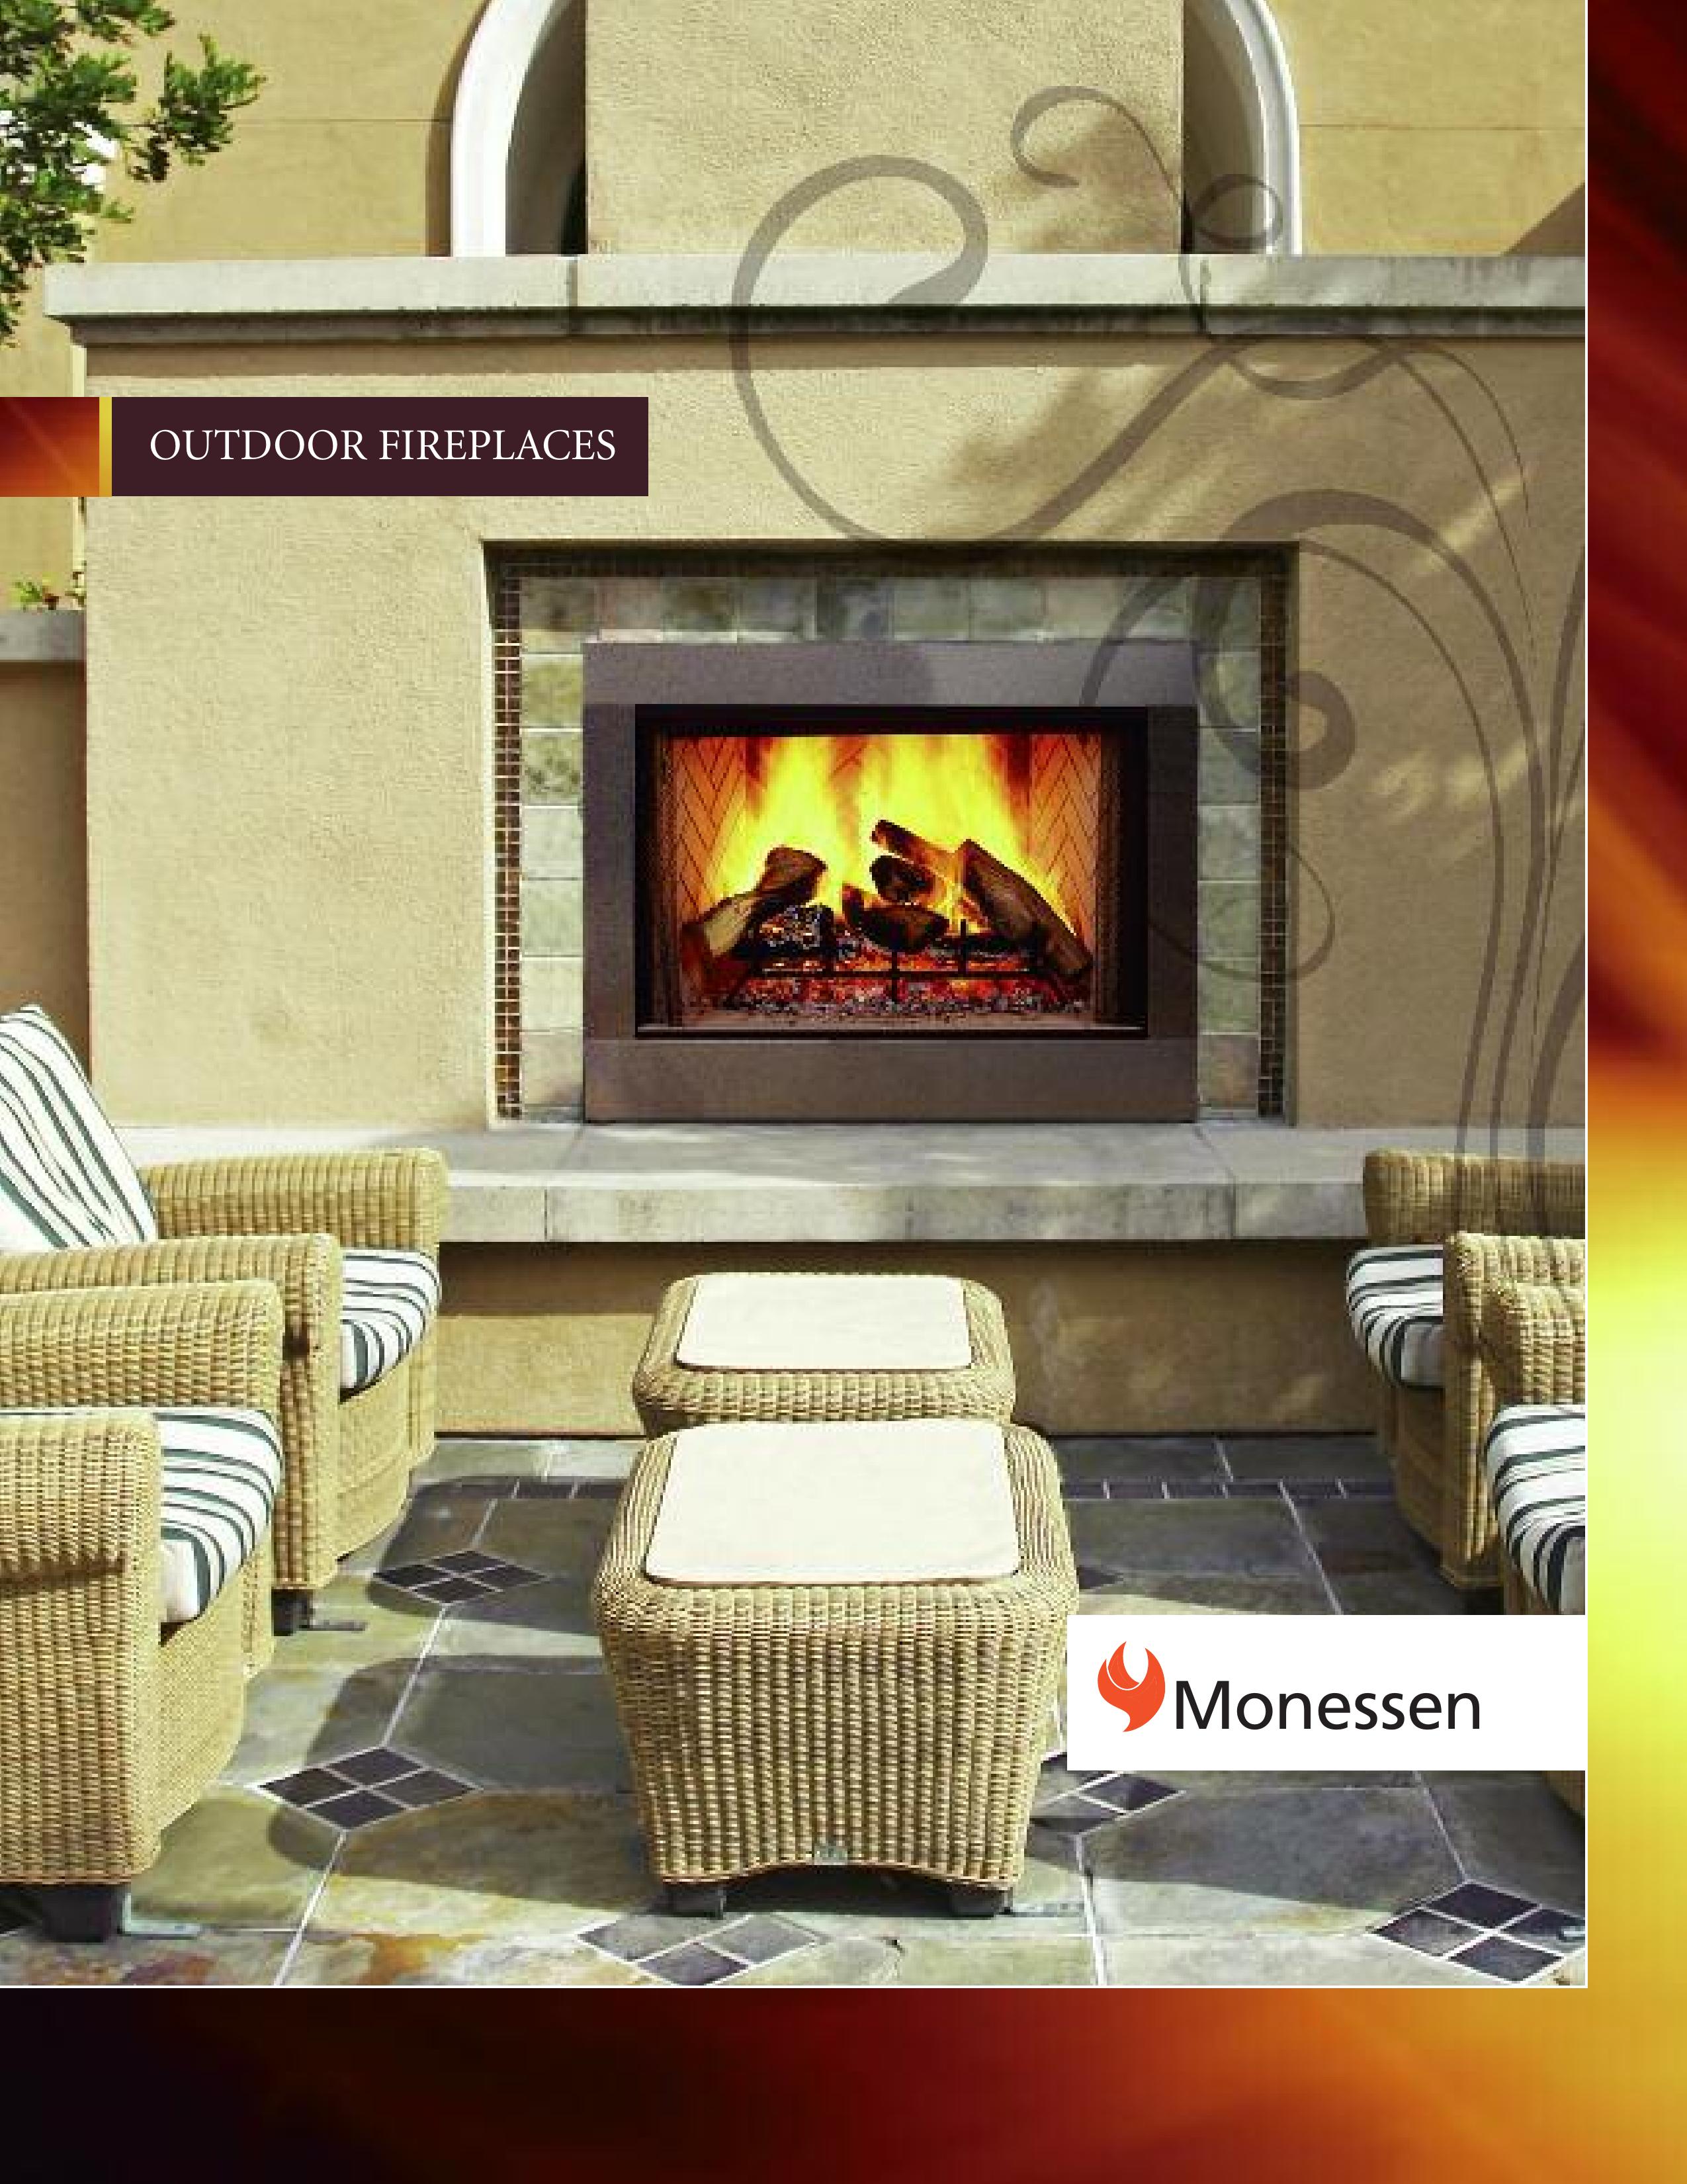 Monessen Hearth ODWR500 Outdoor Fireplace User Manual